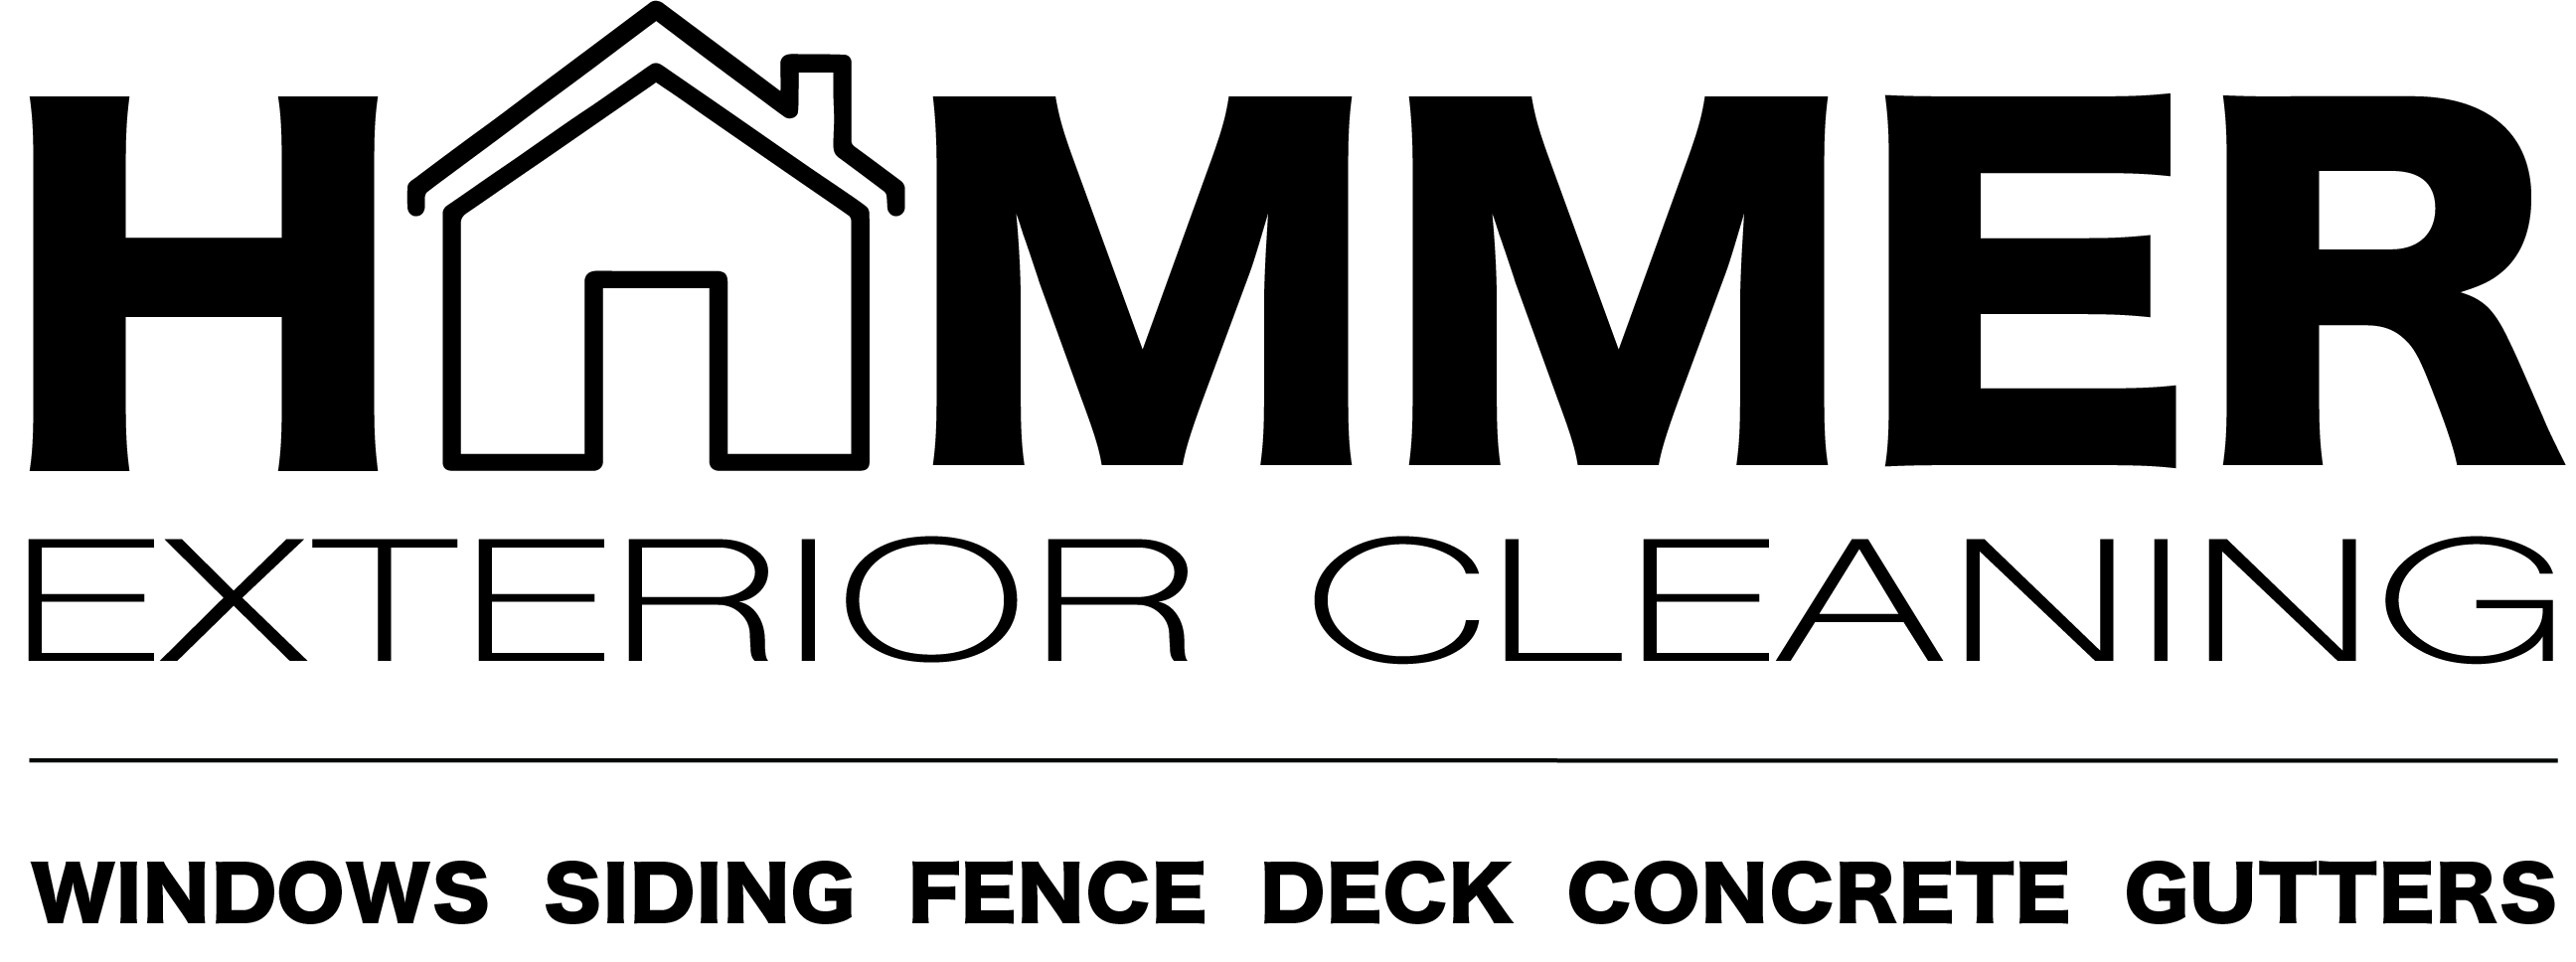 Hammer Exterior Cleaning Logo